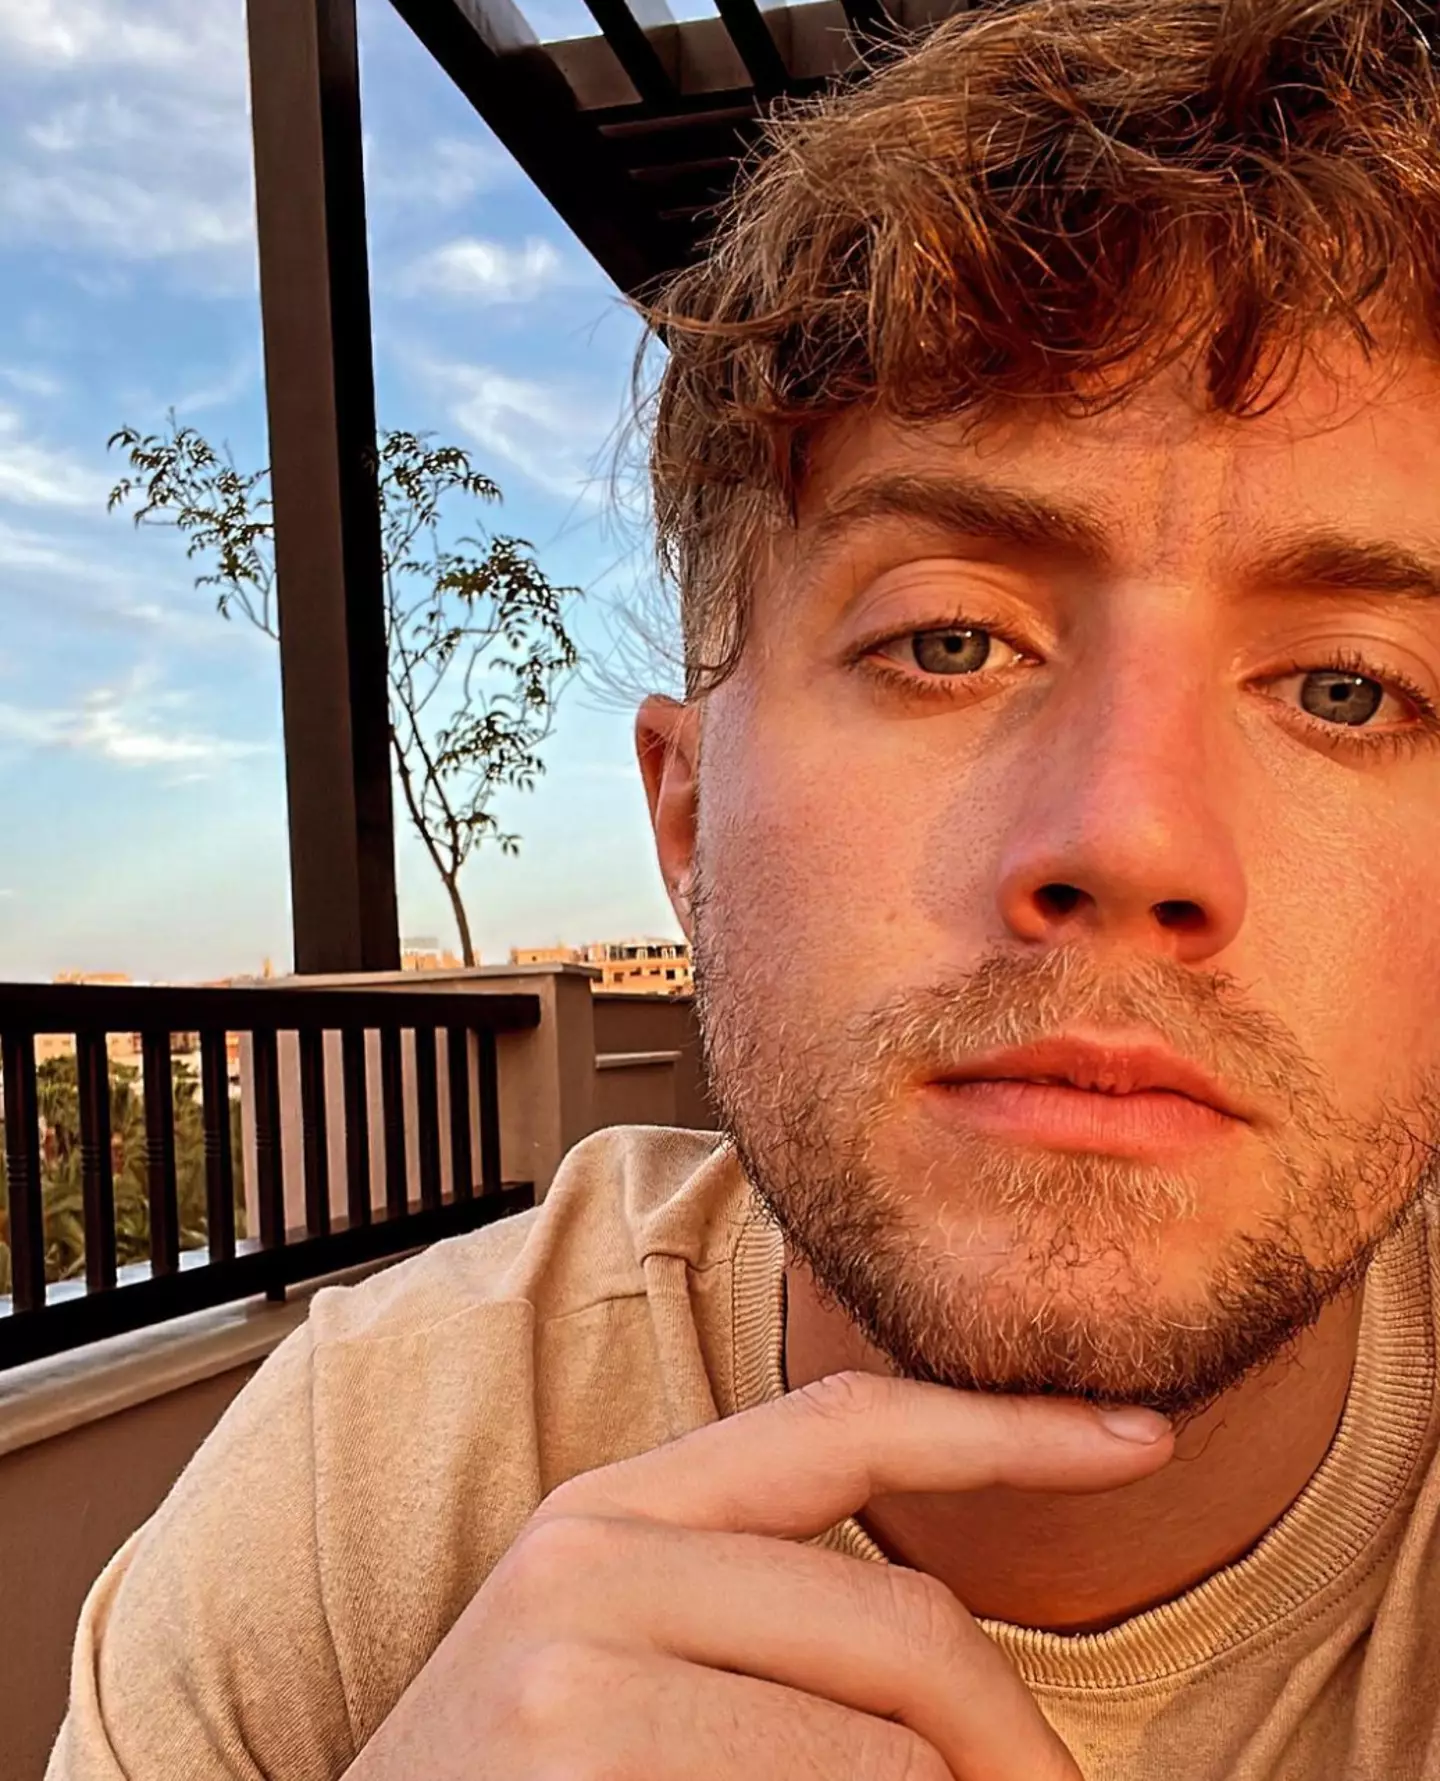 Roman Kemp has opened up about his sleep disorder.